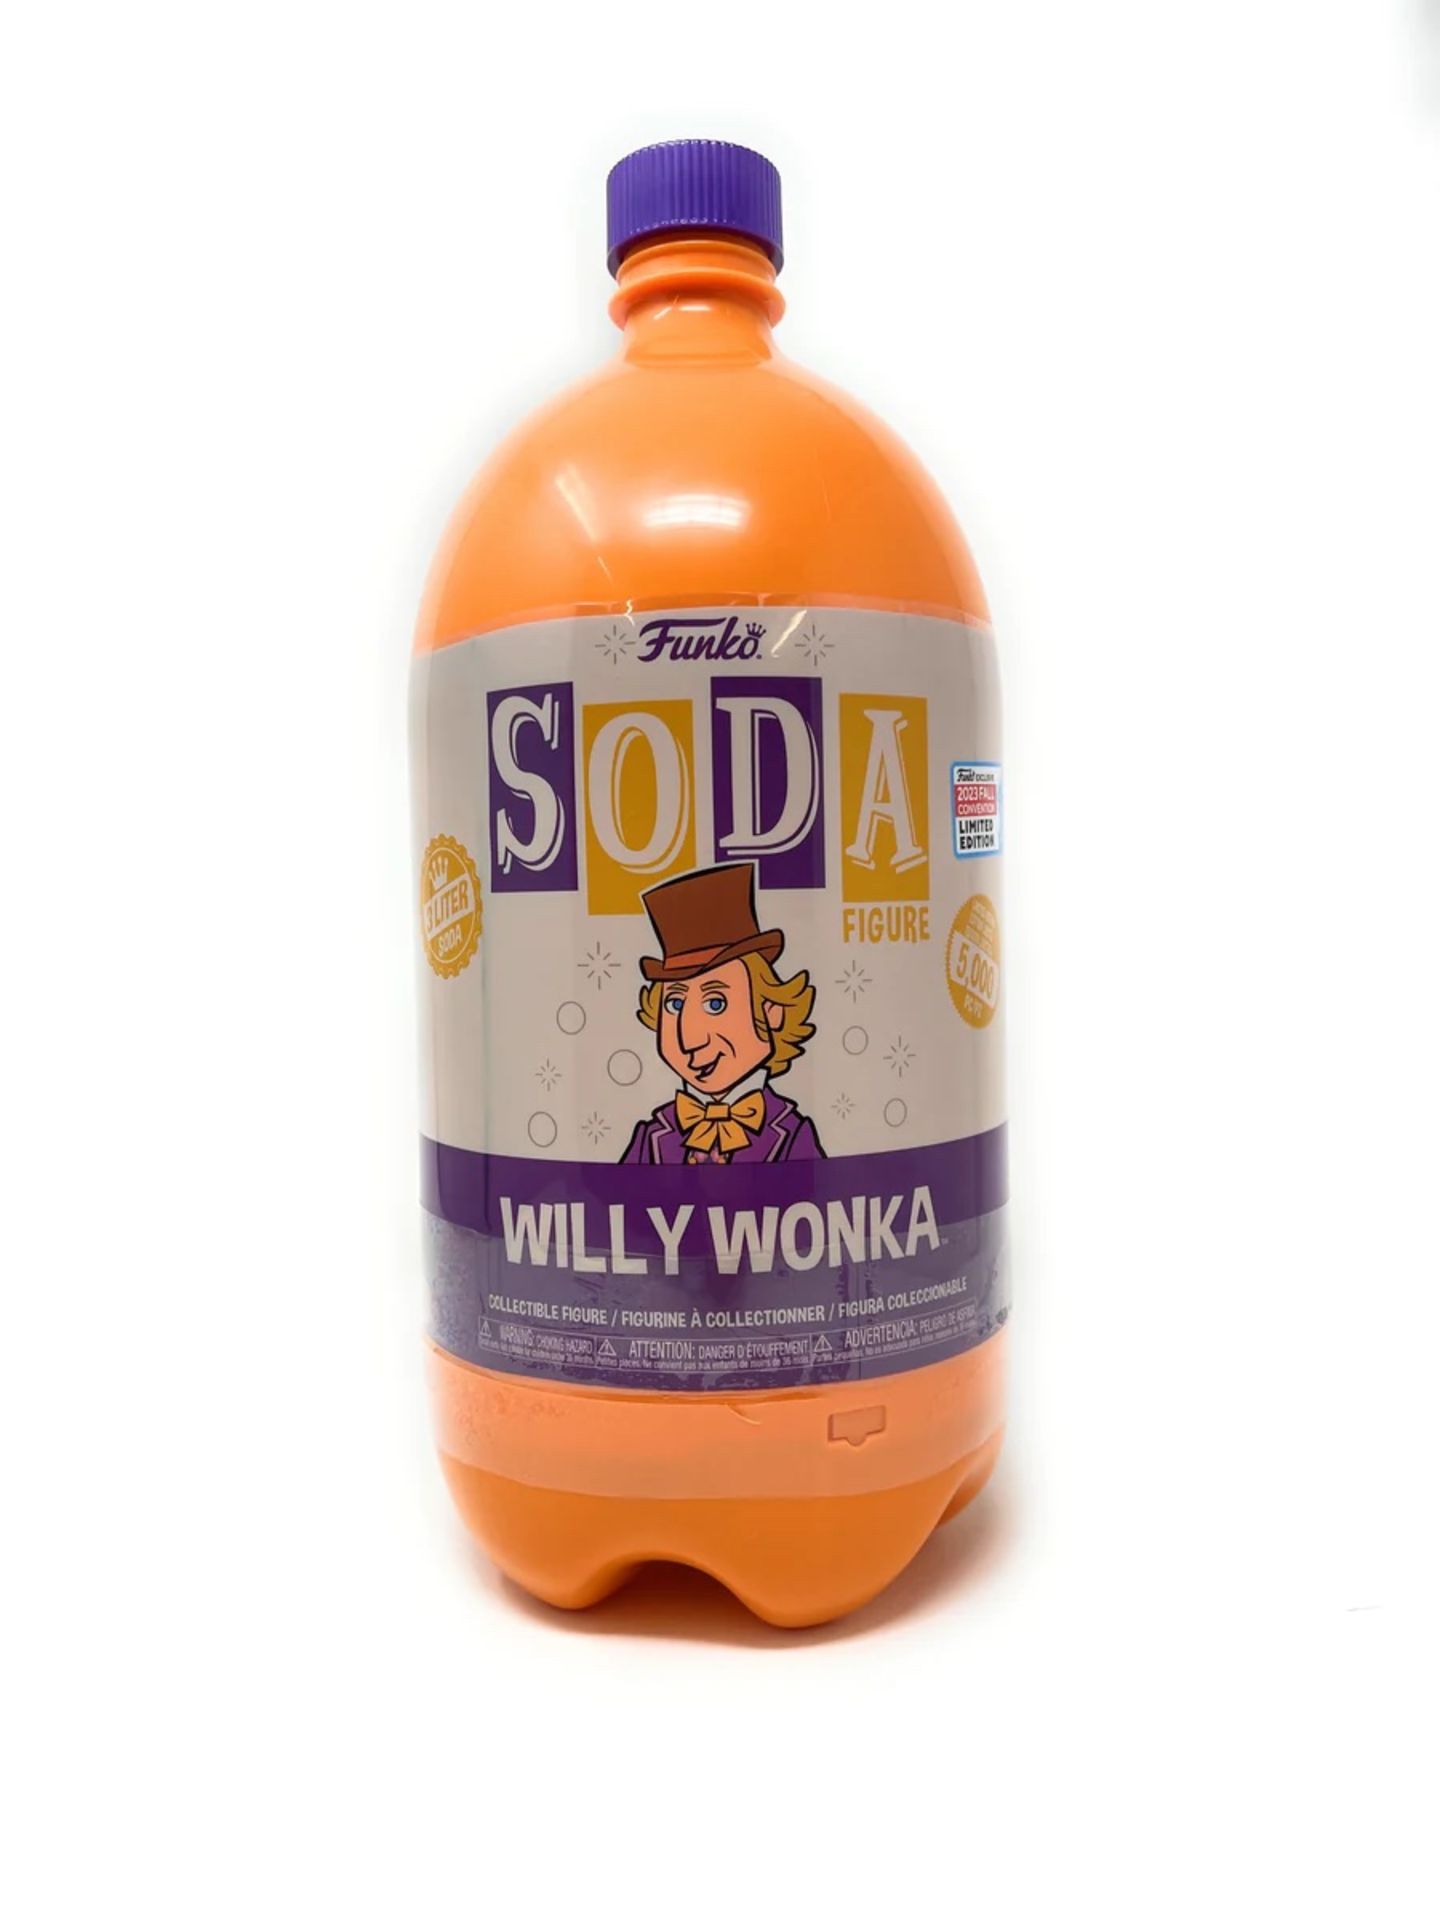 Funko Vinyl Soda â€˜Willy Wonkaâ€™ Ltd Edition Collectable - NEW & SEALED - Image 11 of 11